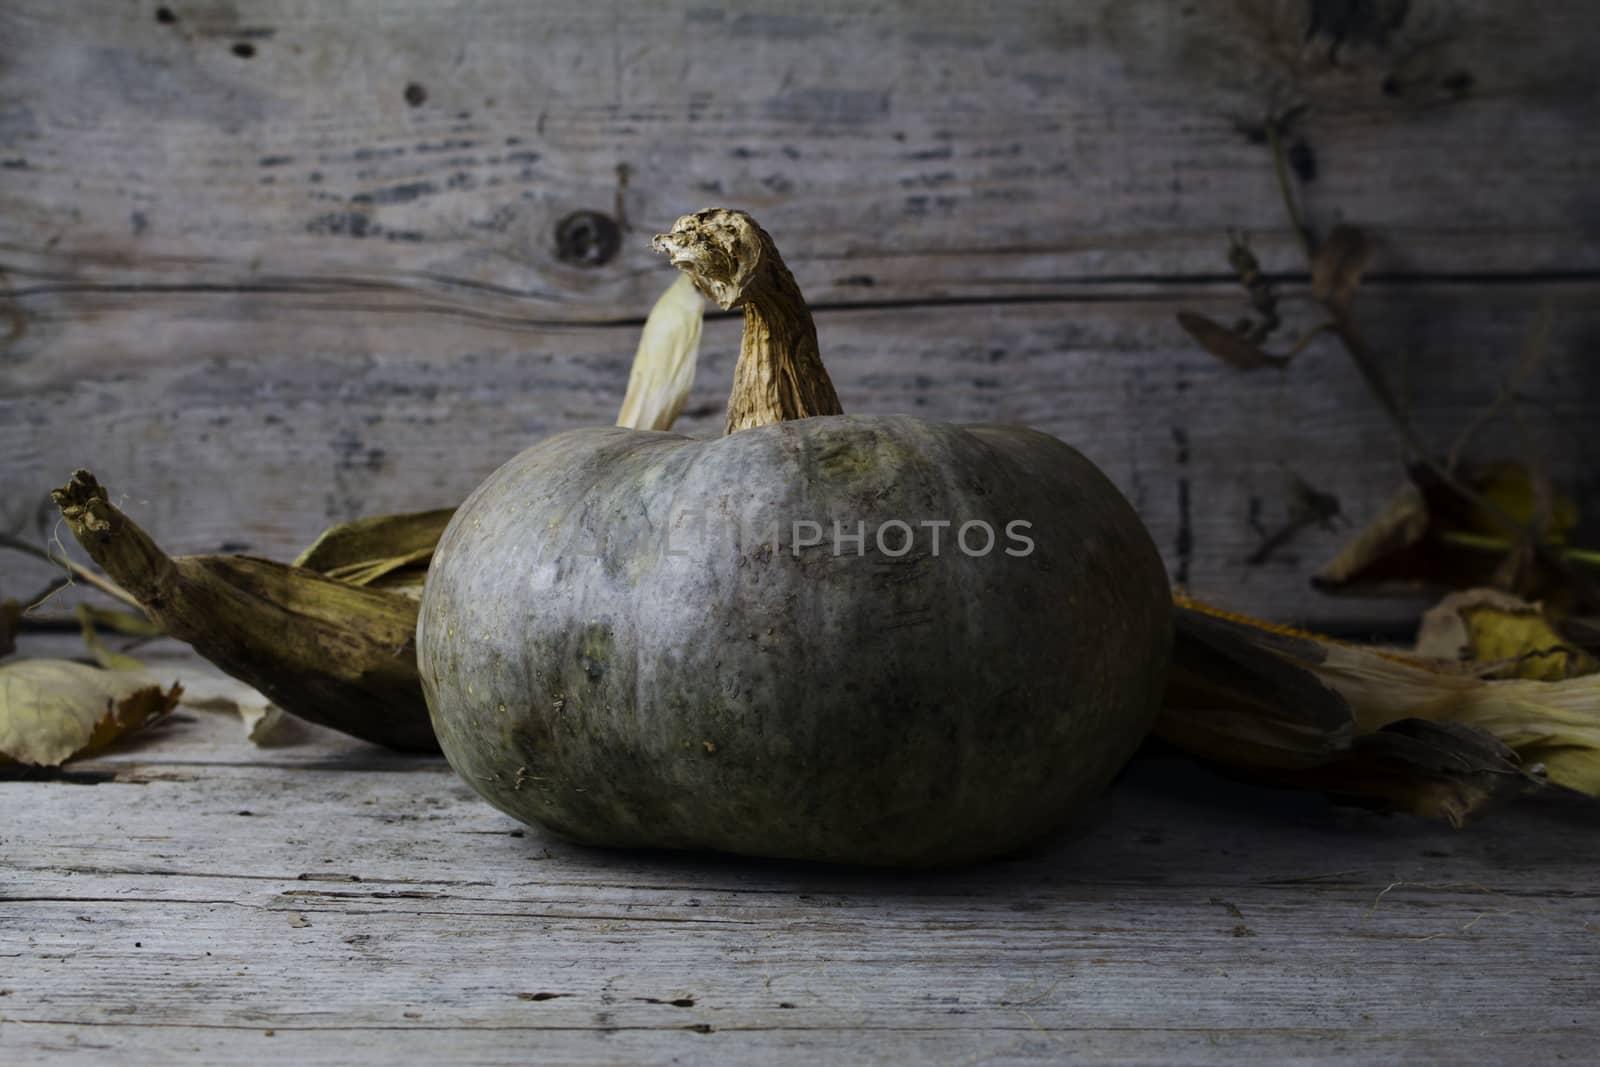 Pumpkins, Corncob and autumn leaves Decoration on a wooden table 